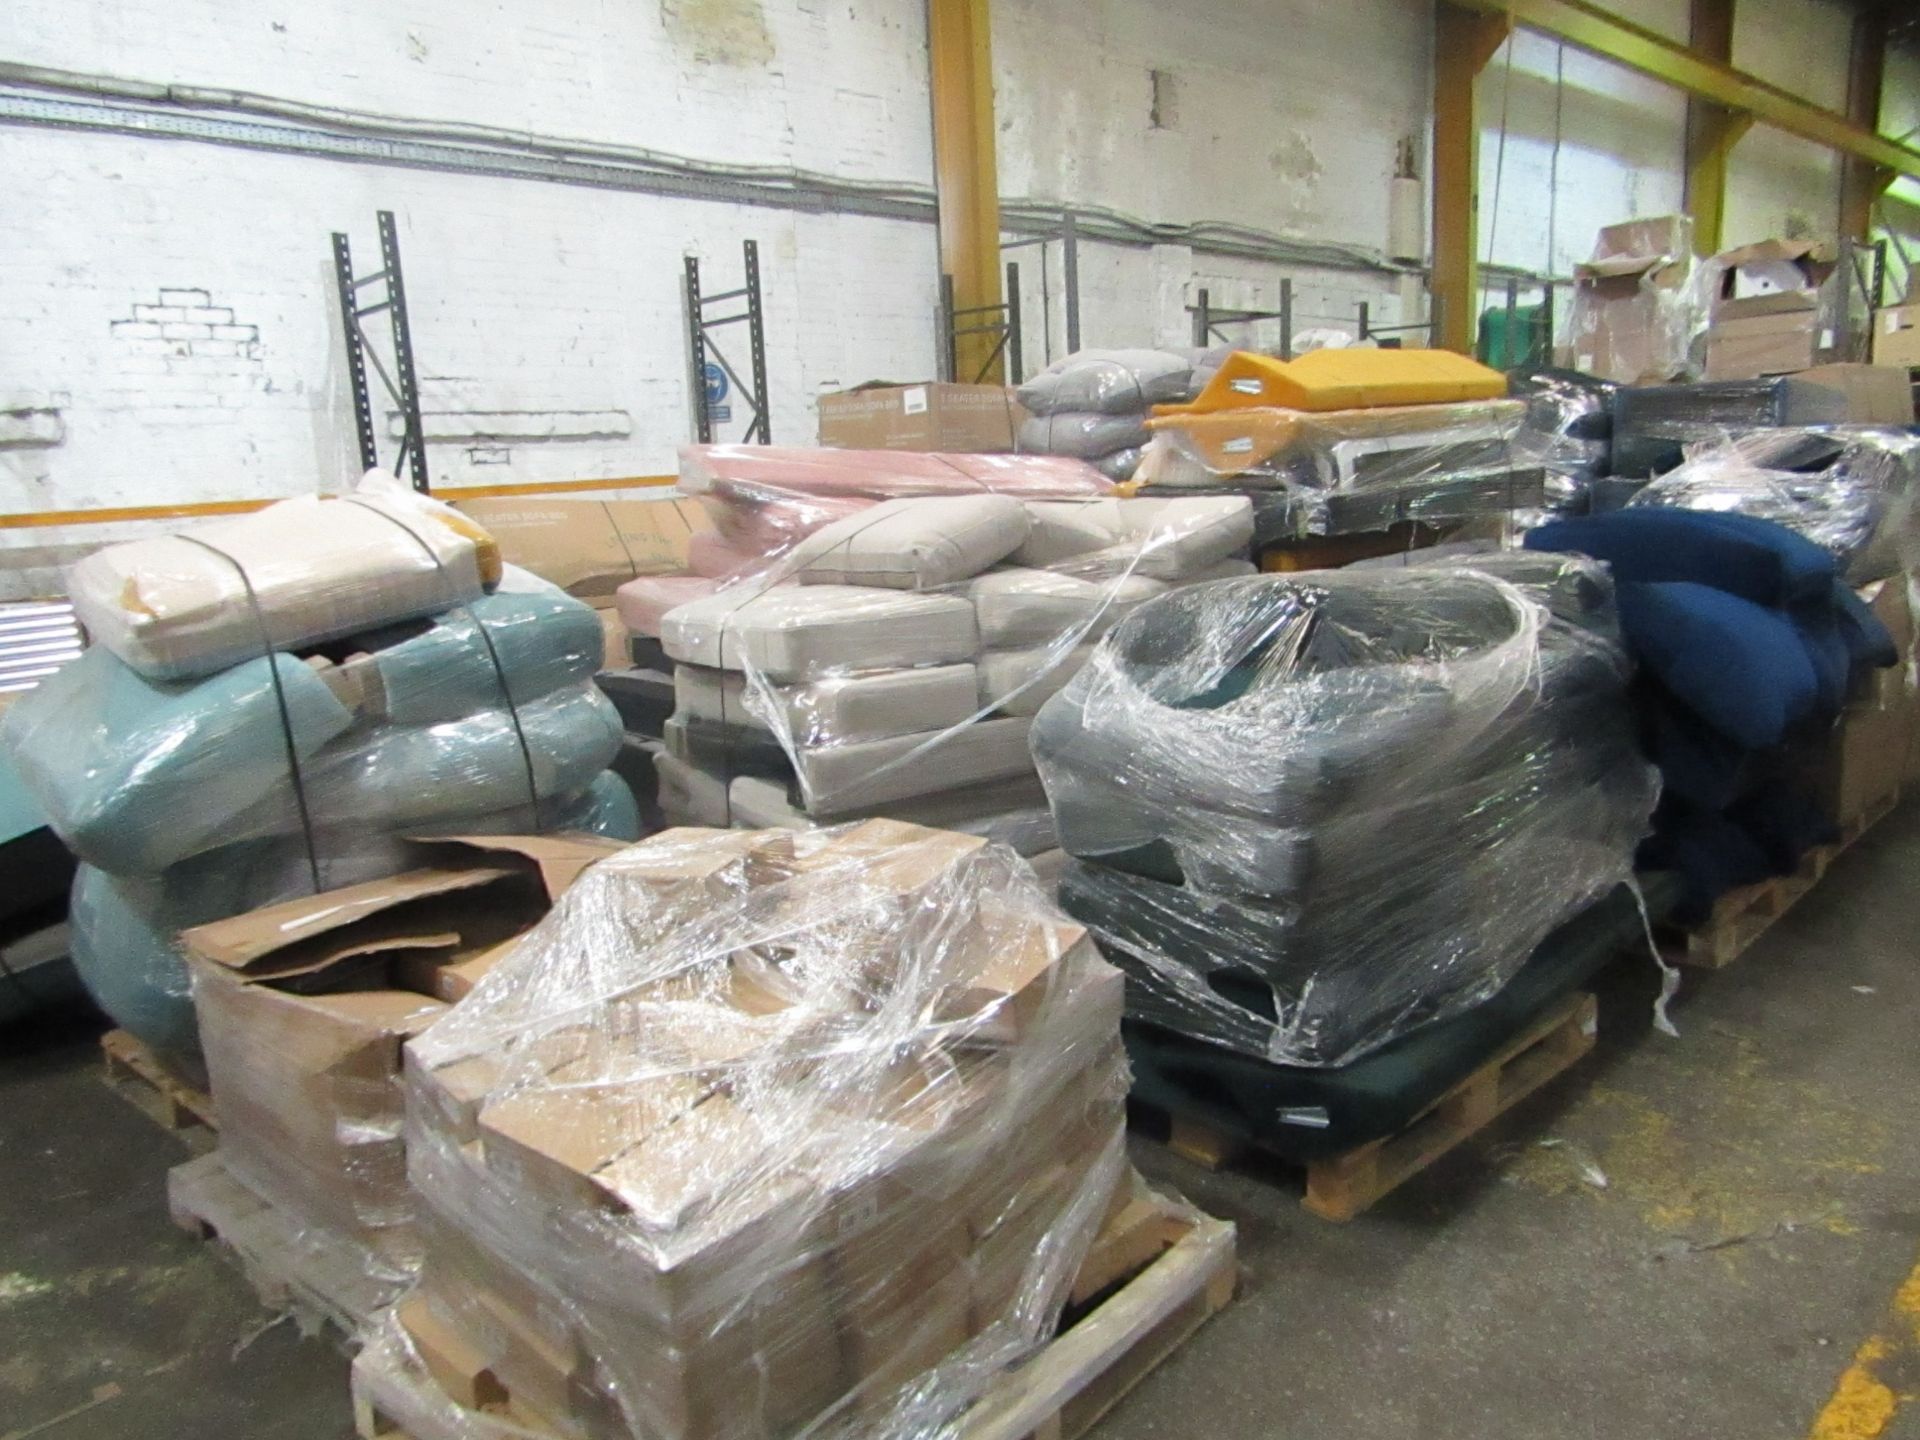 10% Buyers Premium +VAT, 24 Pallets of Genuine SNUG SOFA parts - Mixed Lots of Bases Backs Arms - Image 5 of 20